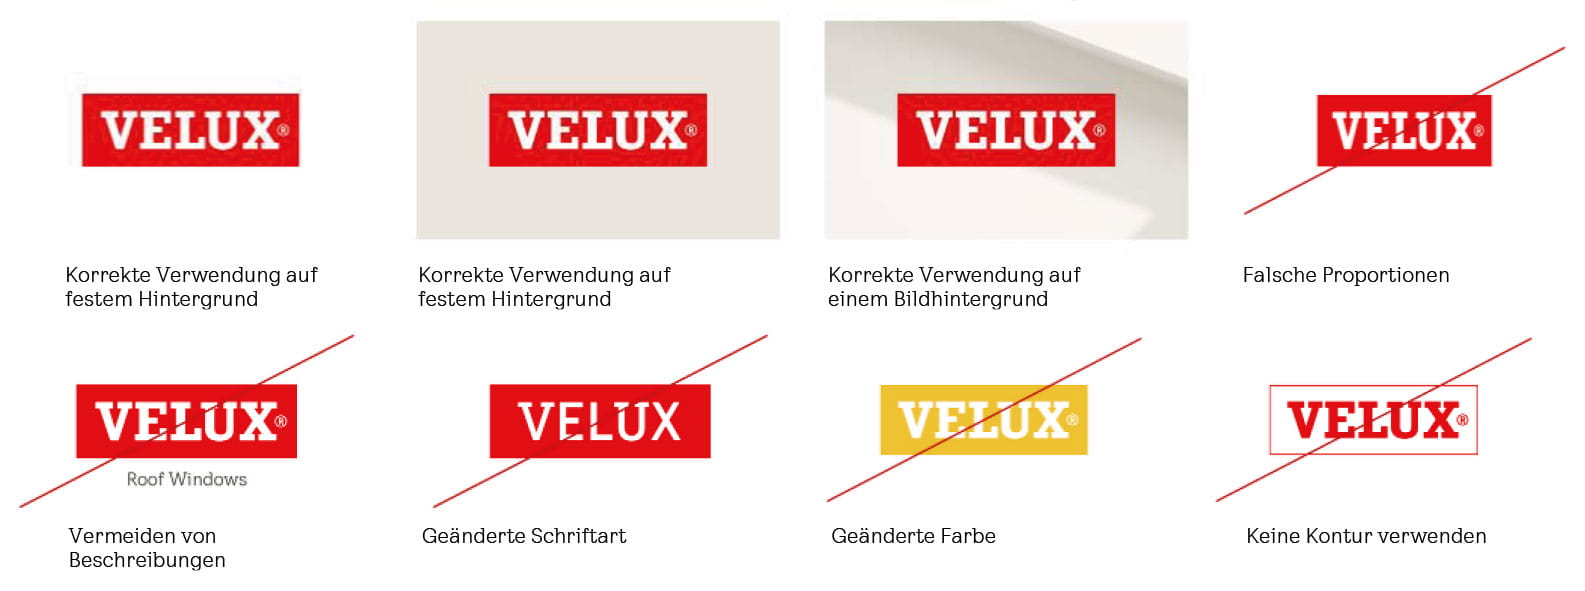 VELUX Logo Do's and Dont's